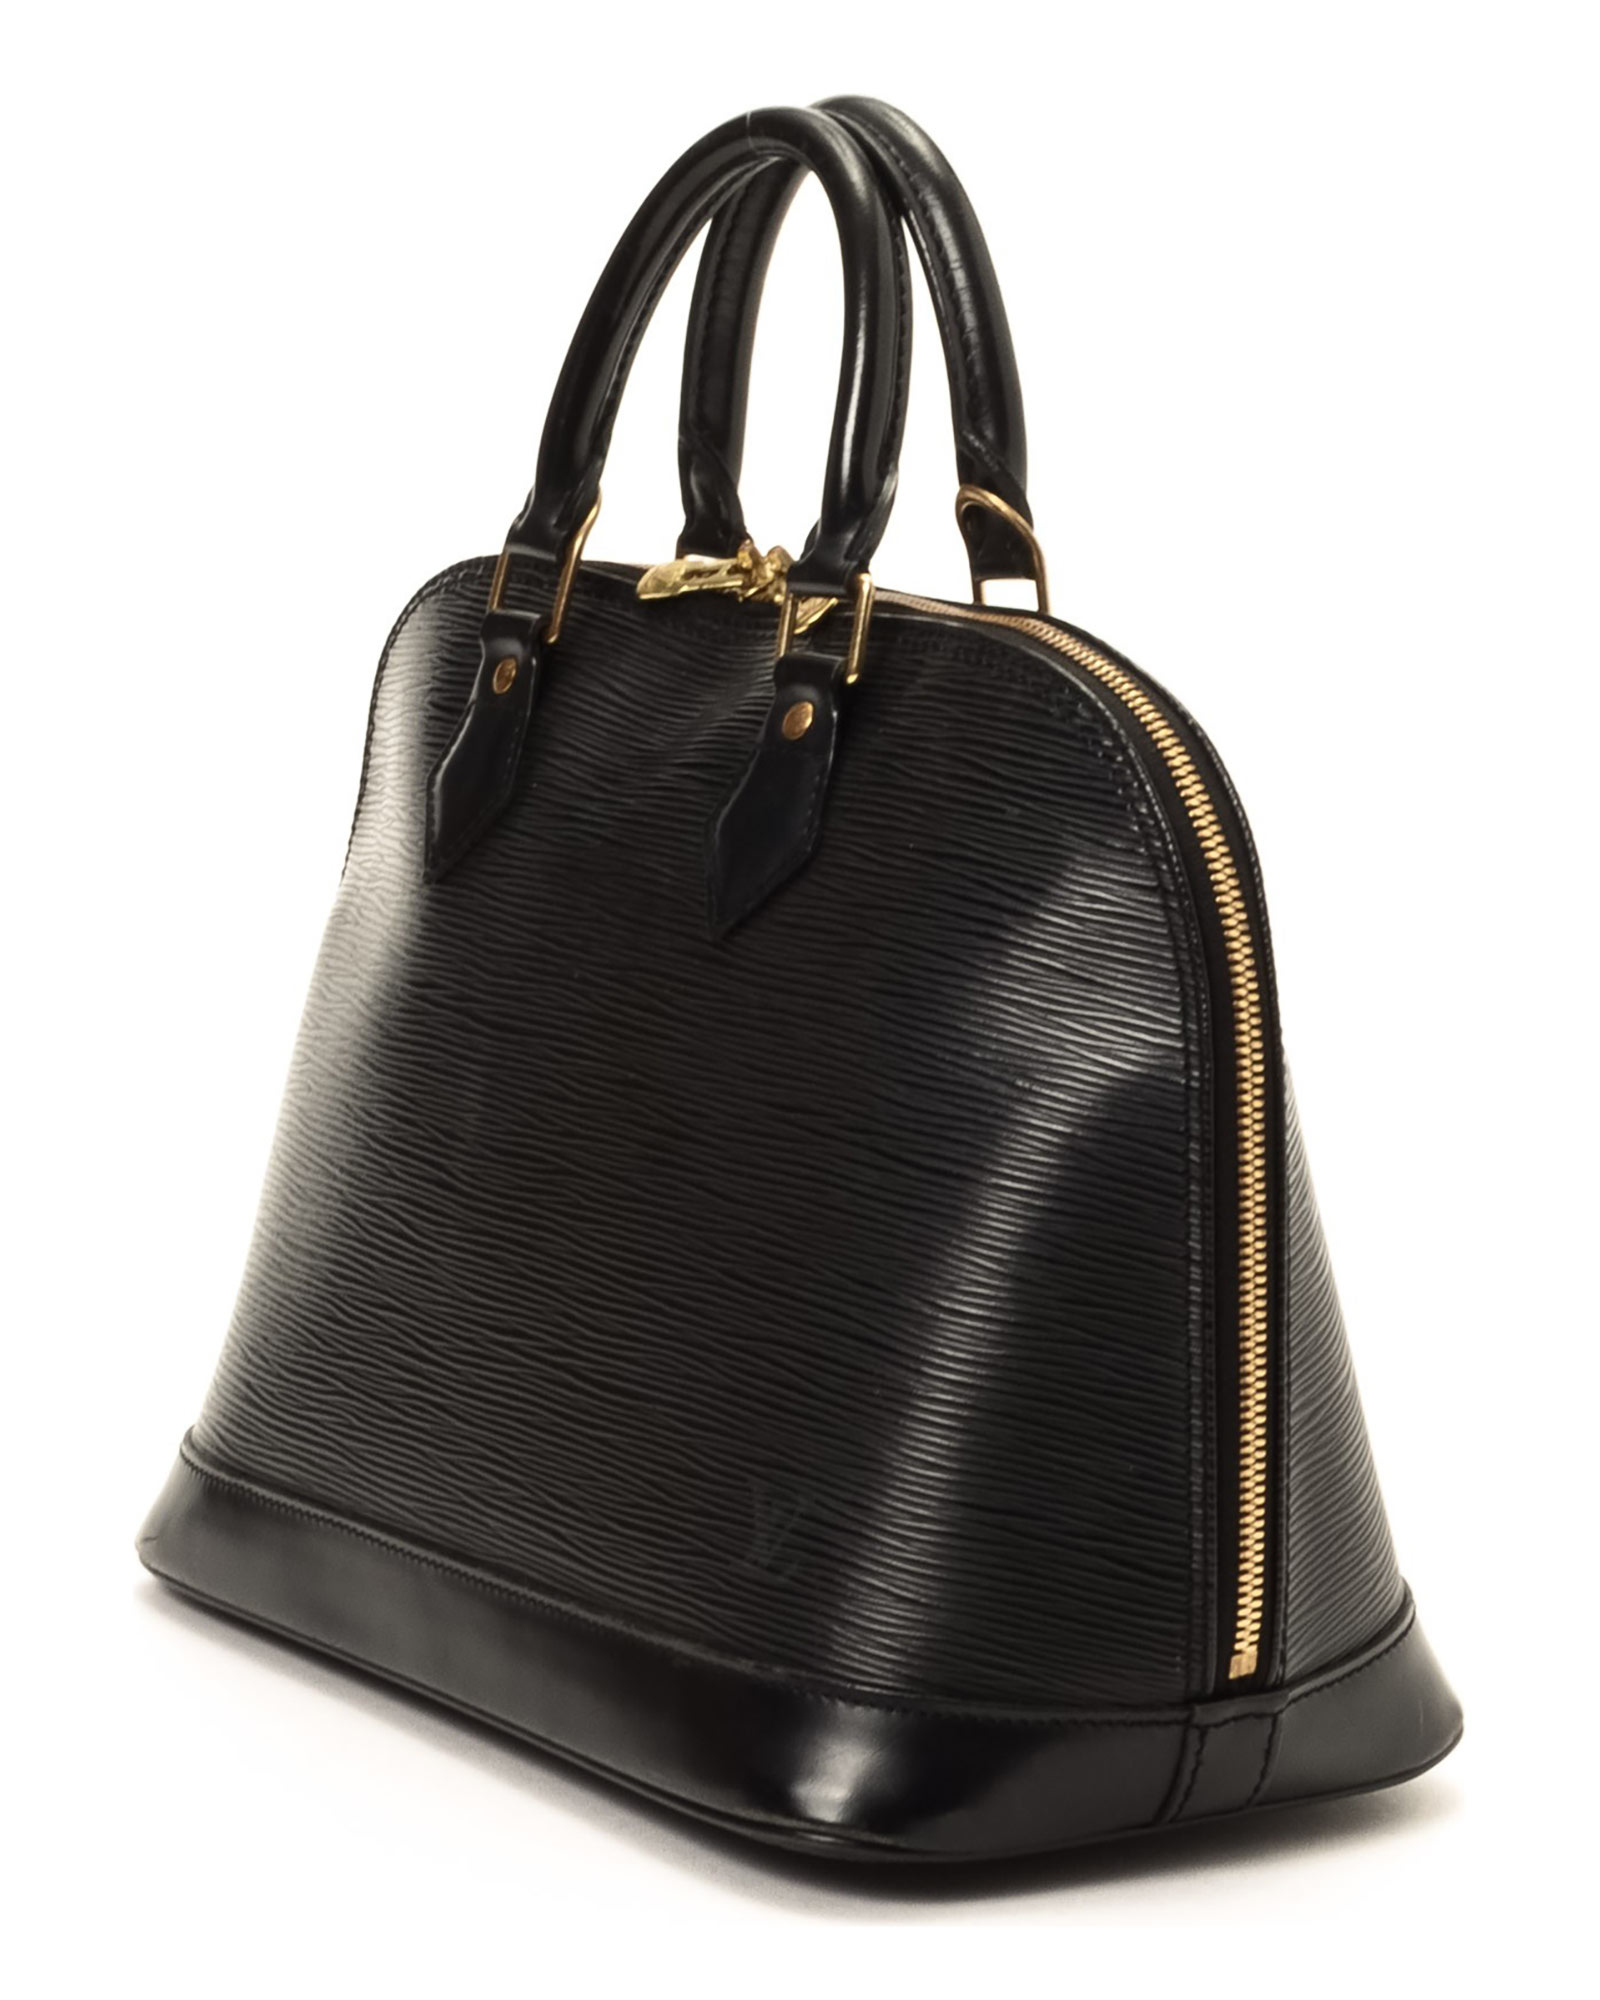 All Black Louis Vuitton Bag Dupe | IUCN Water